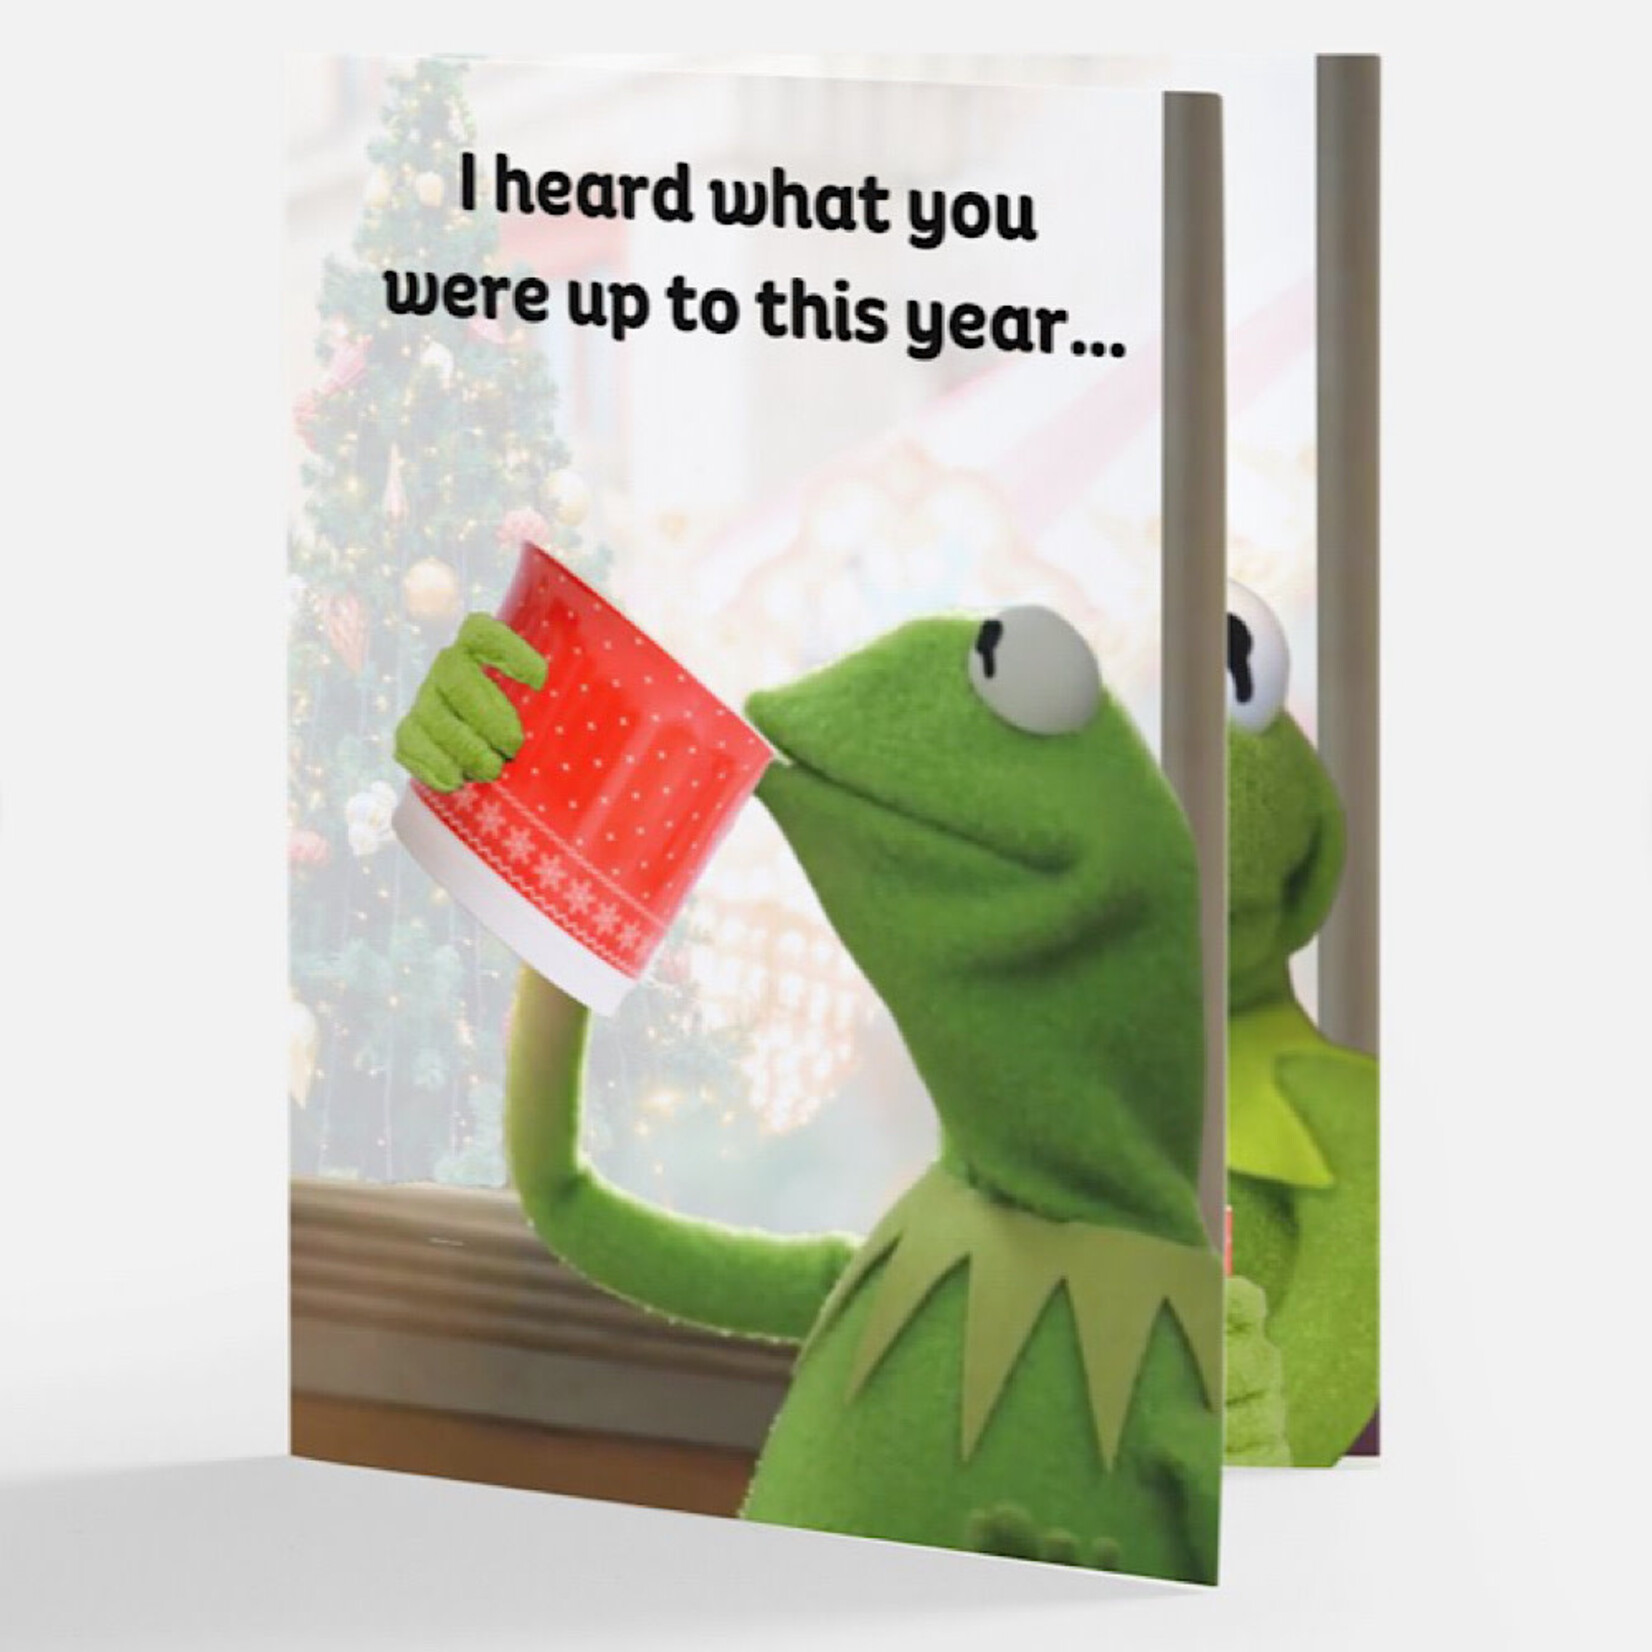 Bad Annie’s Card (Holiday) - I Heard What You Were Up To This Year But That’s None Of My Business So Happy Holidays (Kermit The Frog)